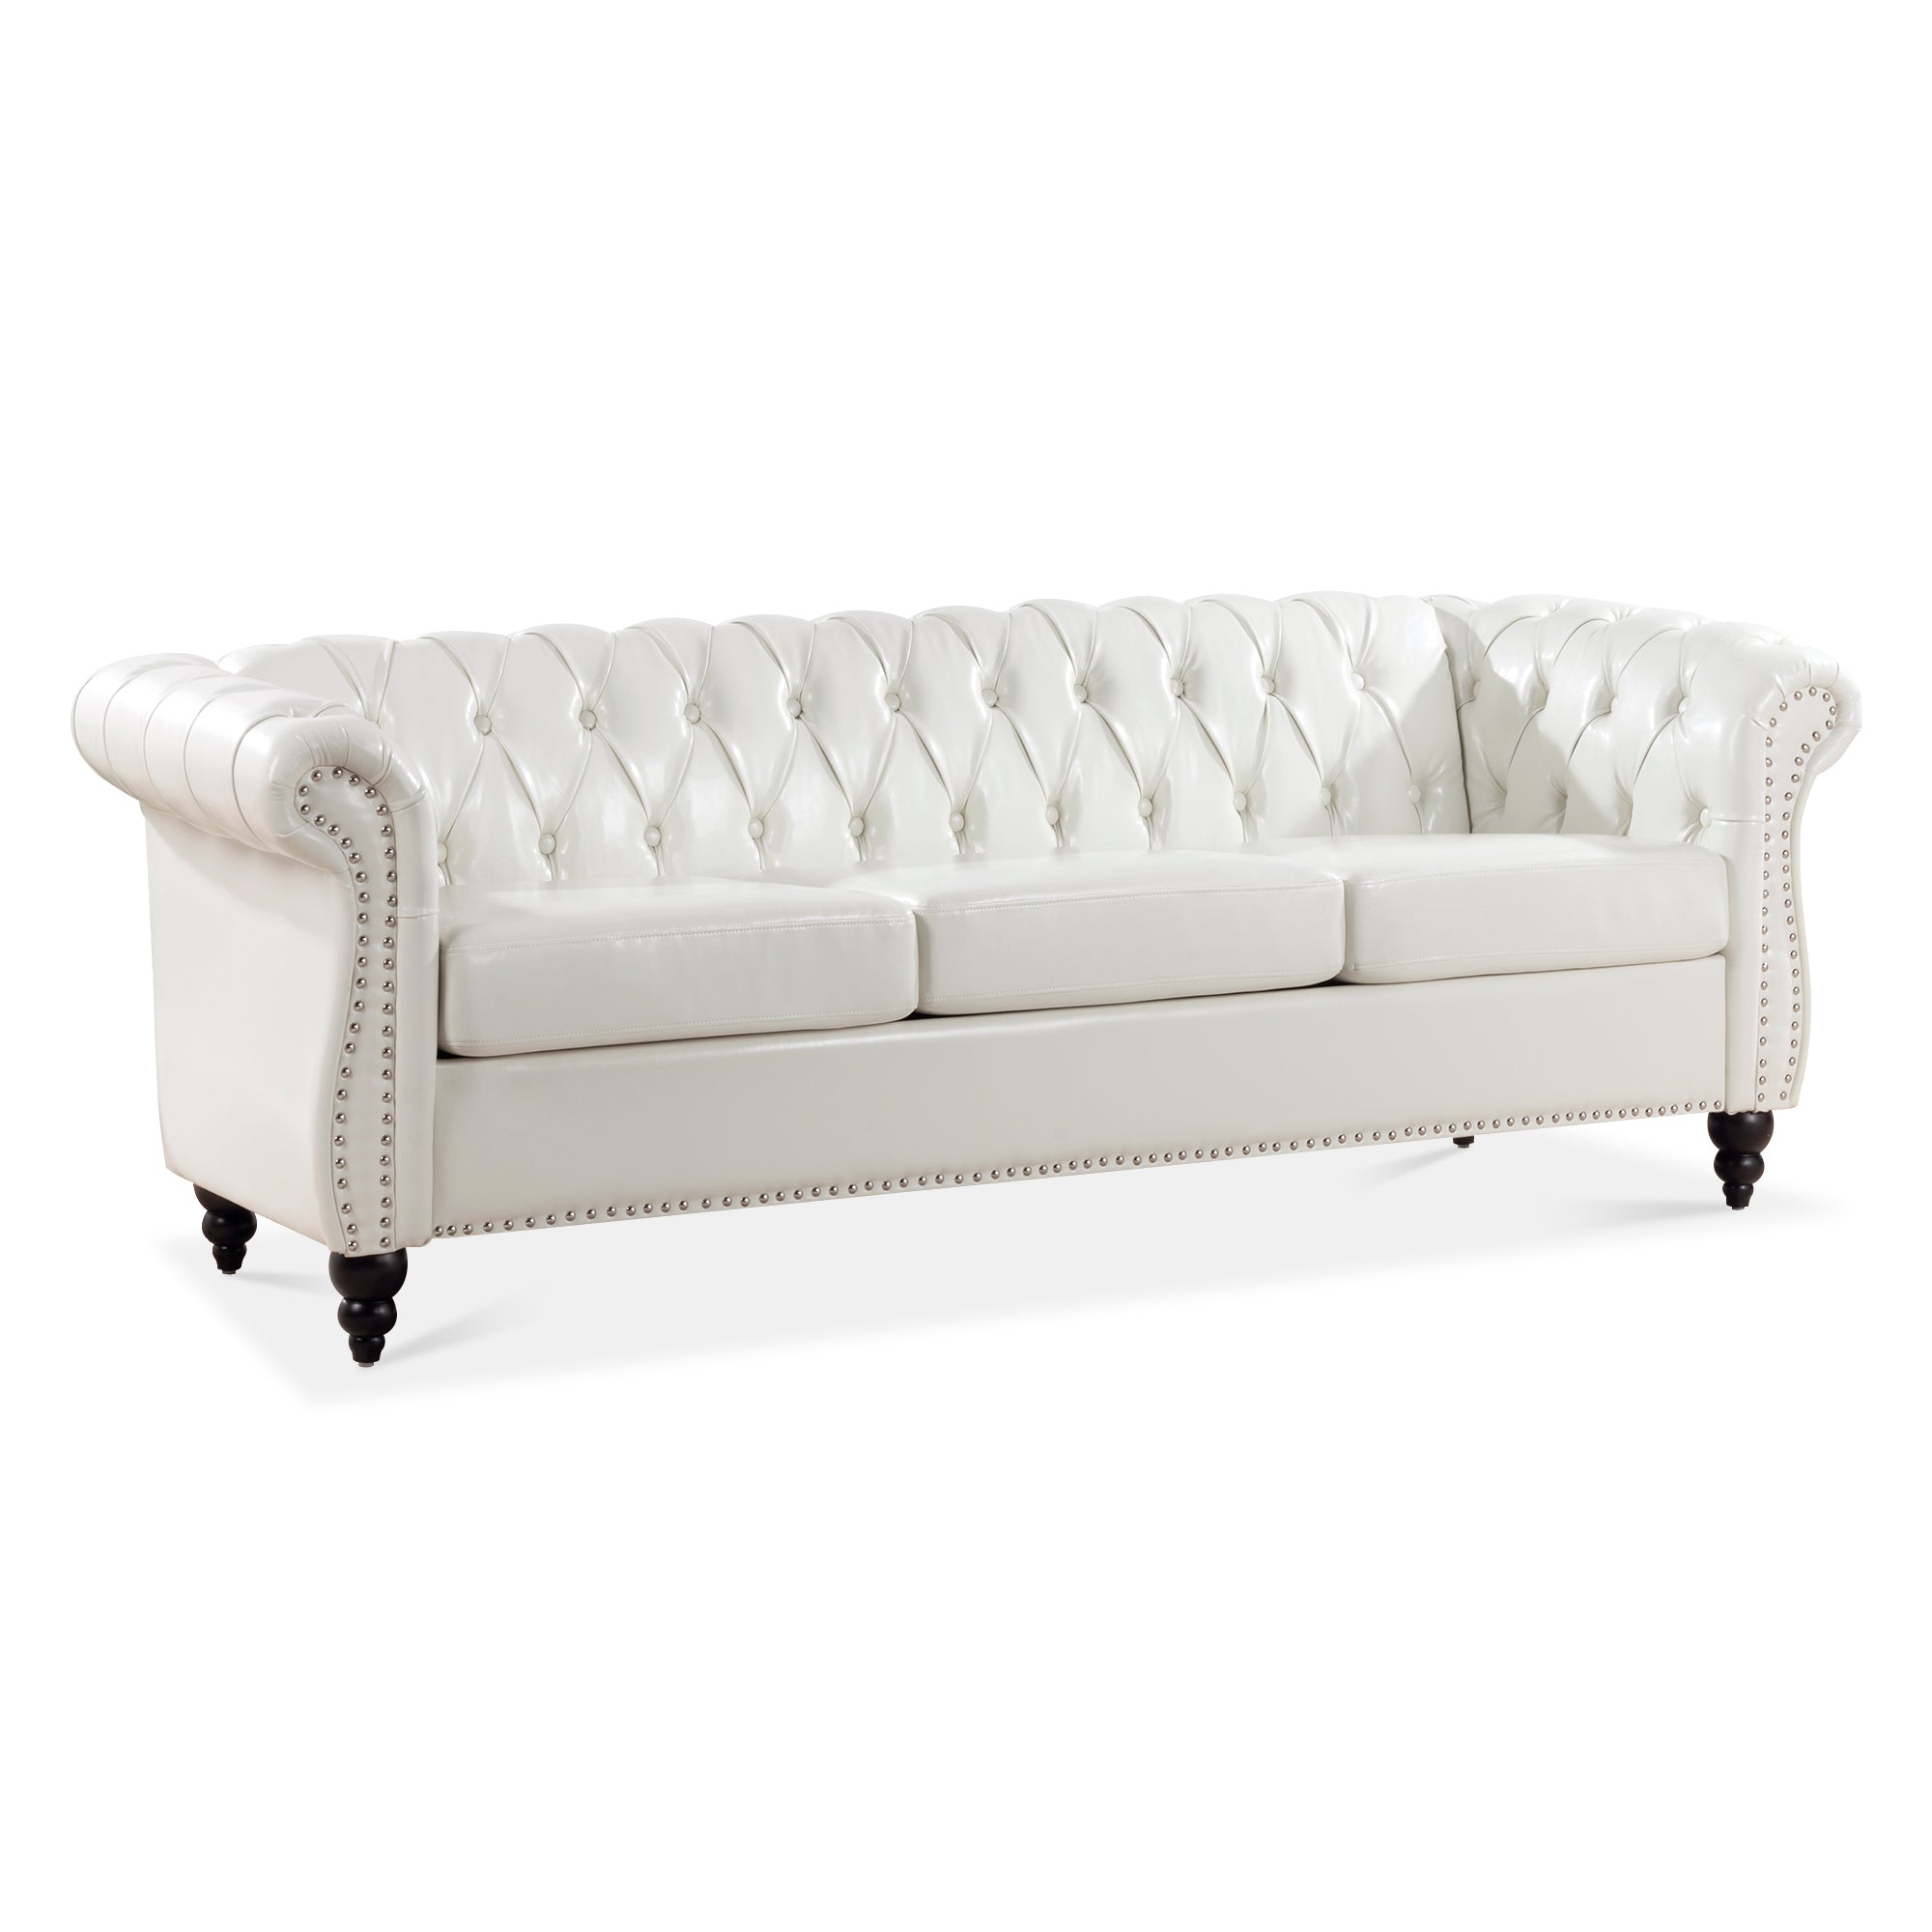 84" White Faux Leather Chesterfield Sofa With Nailhead Trim